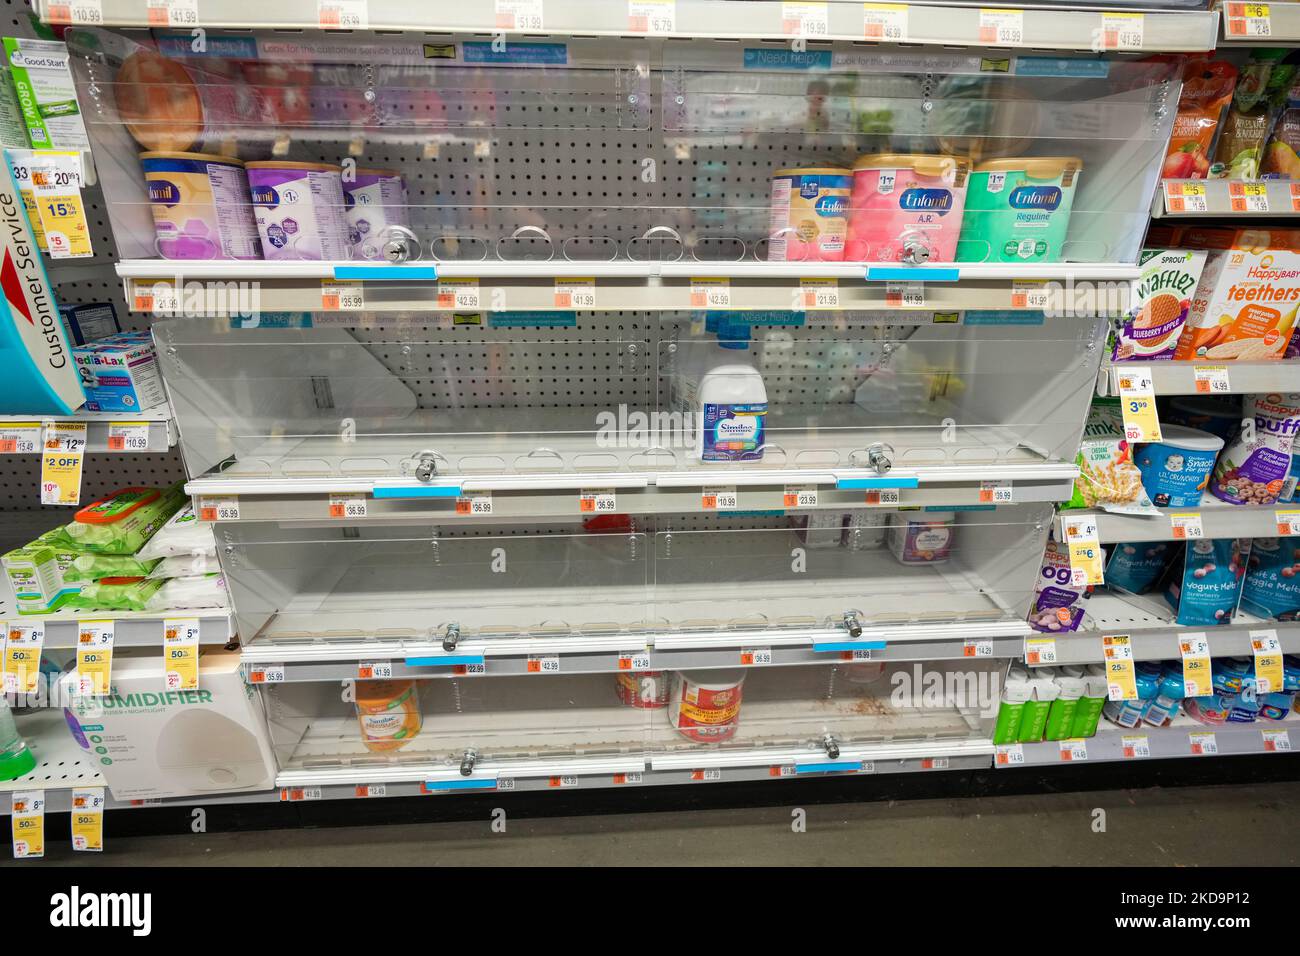 https://c8.alamy.com/comp/2KD9P12/view-of-almost-empty-baby-formula-shelves-at-a-duane-reade-in-new-york-city-usa-on-wednesday-may-11-2022-the-baby-formula-shortage-is-being-exacerbated-by-supply-chain-problems-that-also-have-caused-inflation-to-rise-biden-in-a-white-house-speech-on-tuesday-identified-inflation-which-is-making-the-midterm-landscape-for-democrats-bleaker-by-the-day-as-his-top-issue-photo-by-john-nacionnurphoto-2KD9P12.jpg